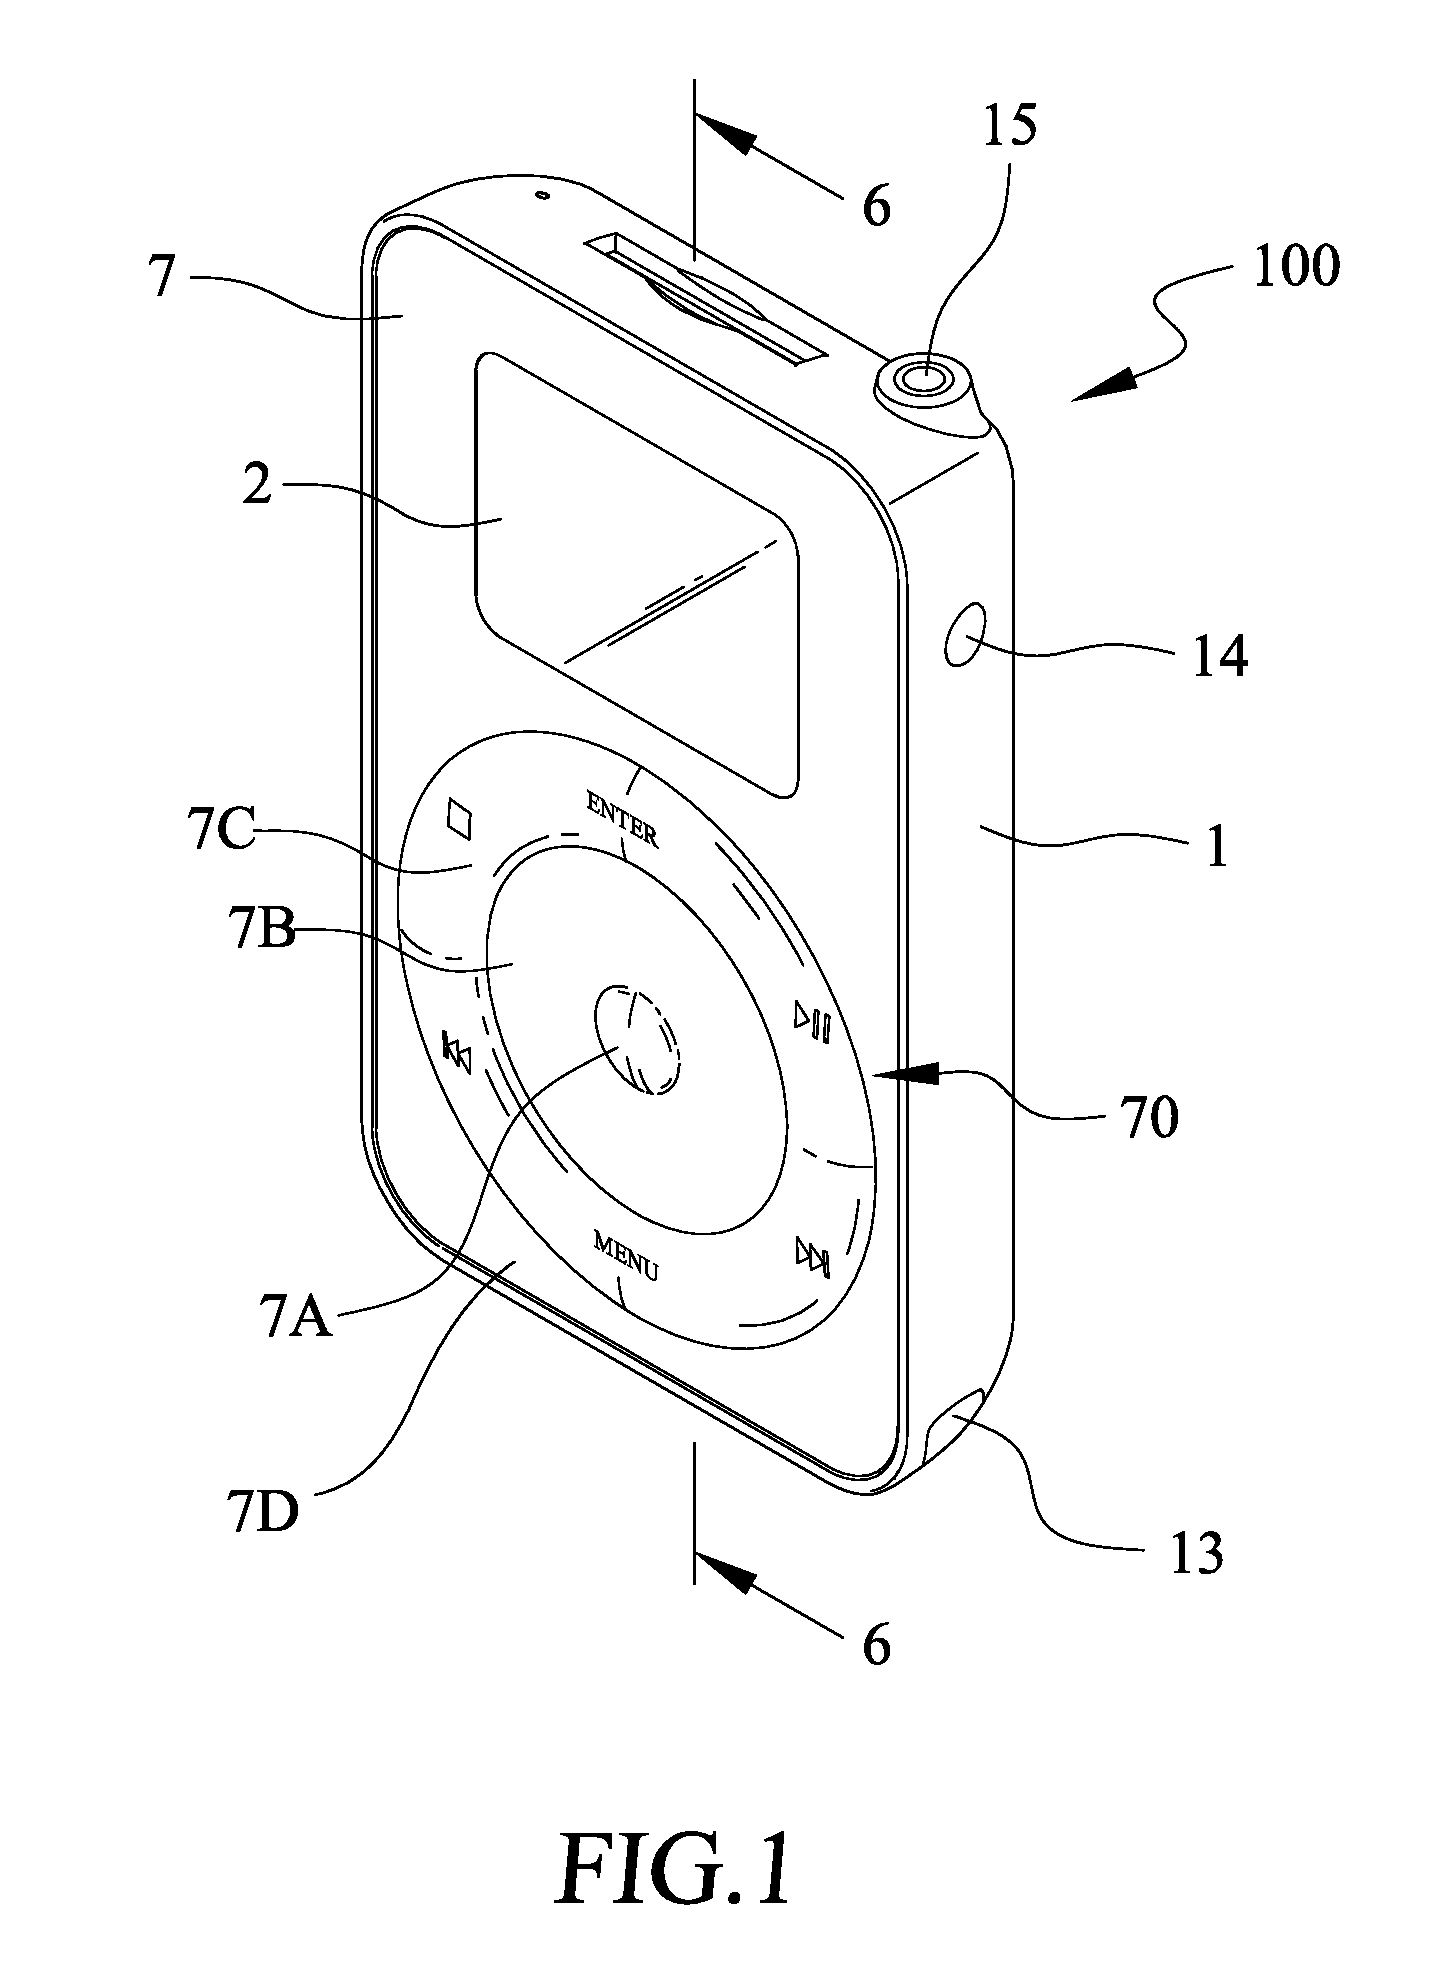 Digital audio/video playing device